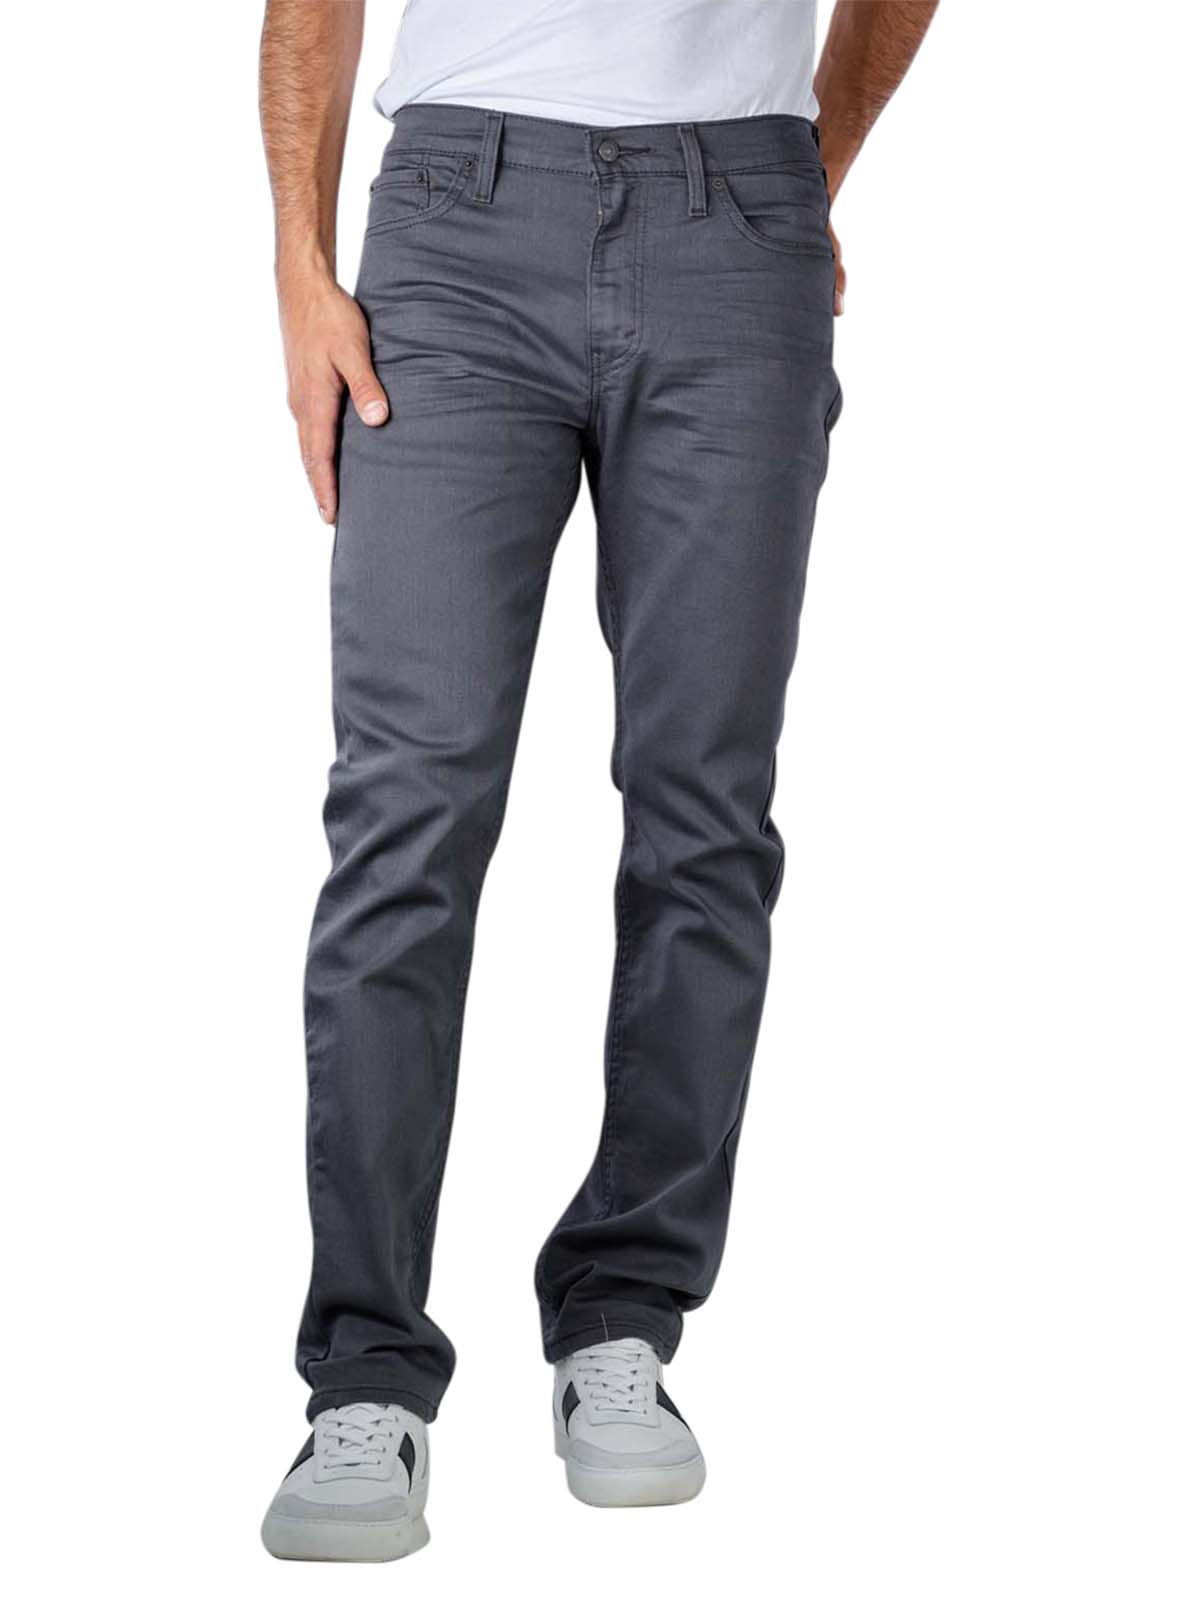 Levi's 511 Jeans Slim Fit grey / black 3d Levi's Men's Jeans | Free  Shipping on  - SIMPLY LOOK GOOD